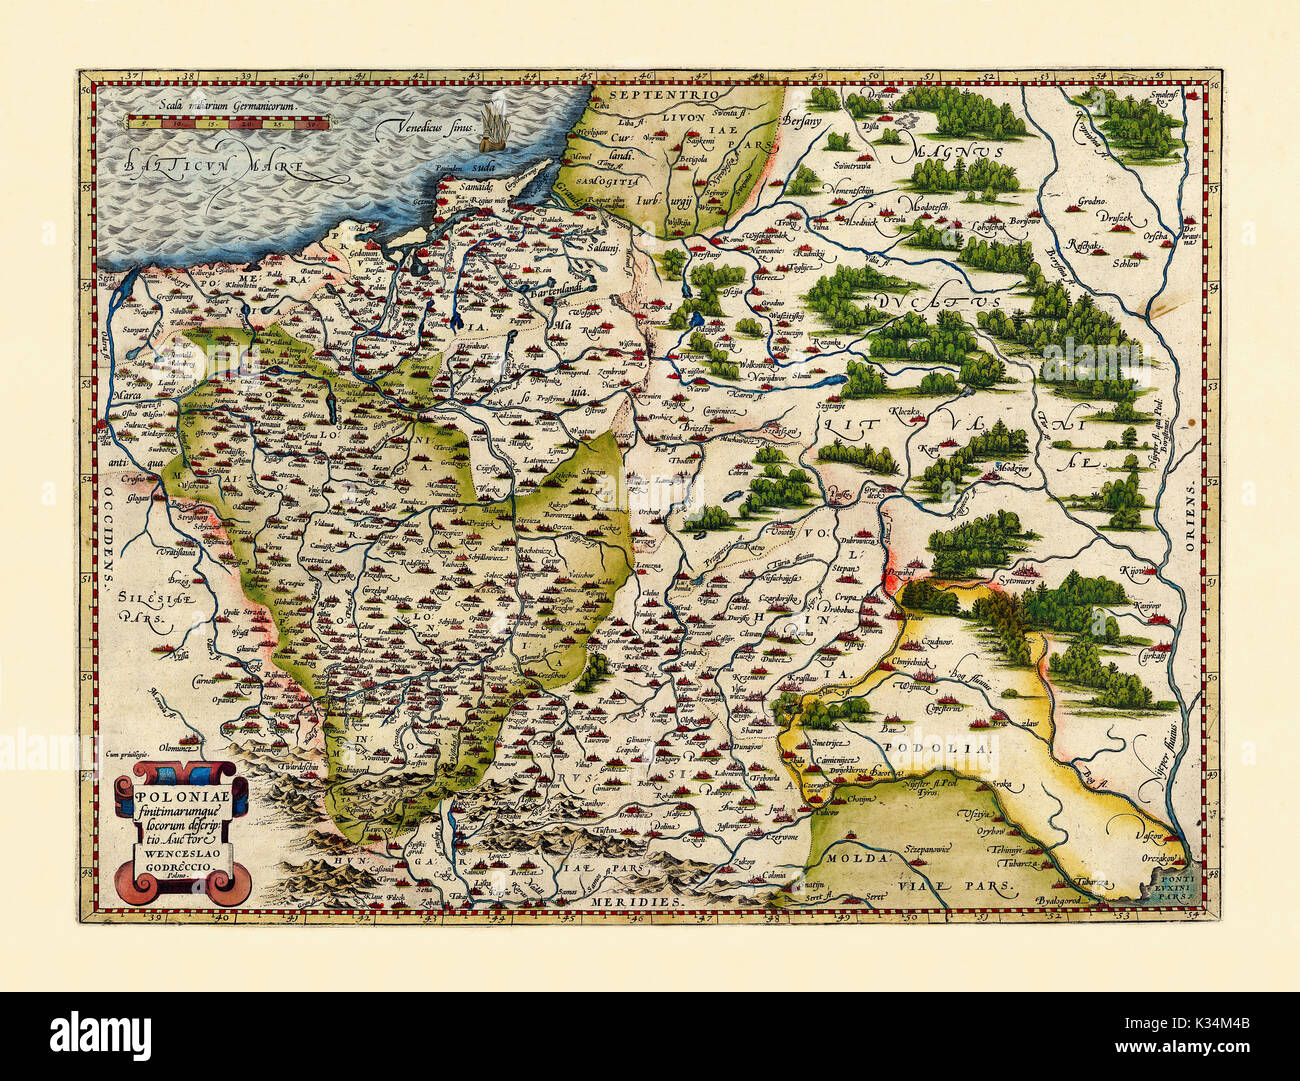 Old map of Poland. Excellent state of preservation realized in ancient style. All the graphic composition is inside a frame. By Ortelius, Theatrum Orbis Terrarum, Antwerp, 1570 Stock Photo